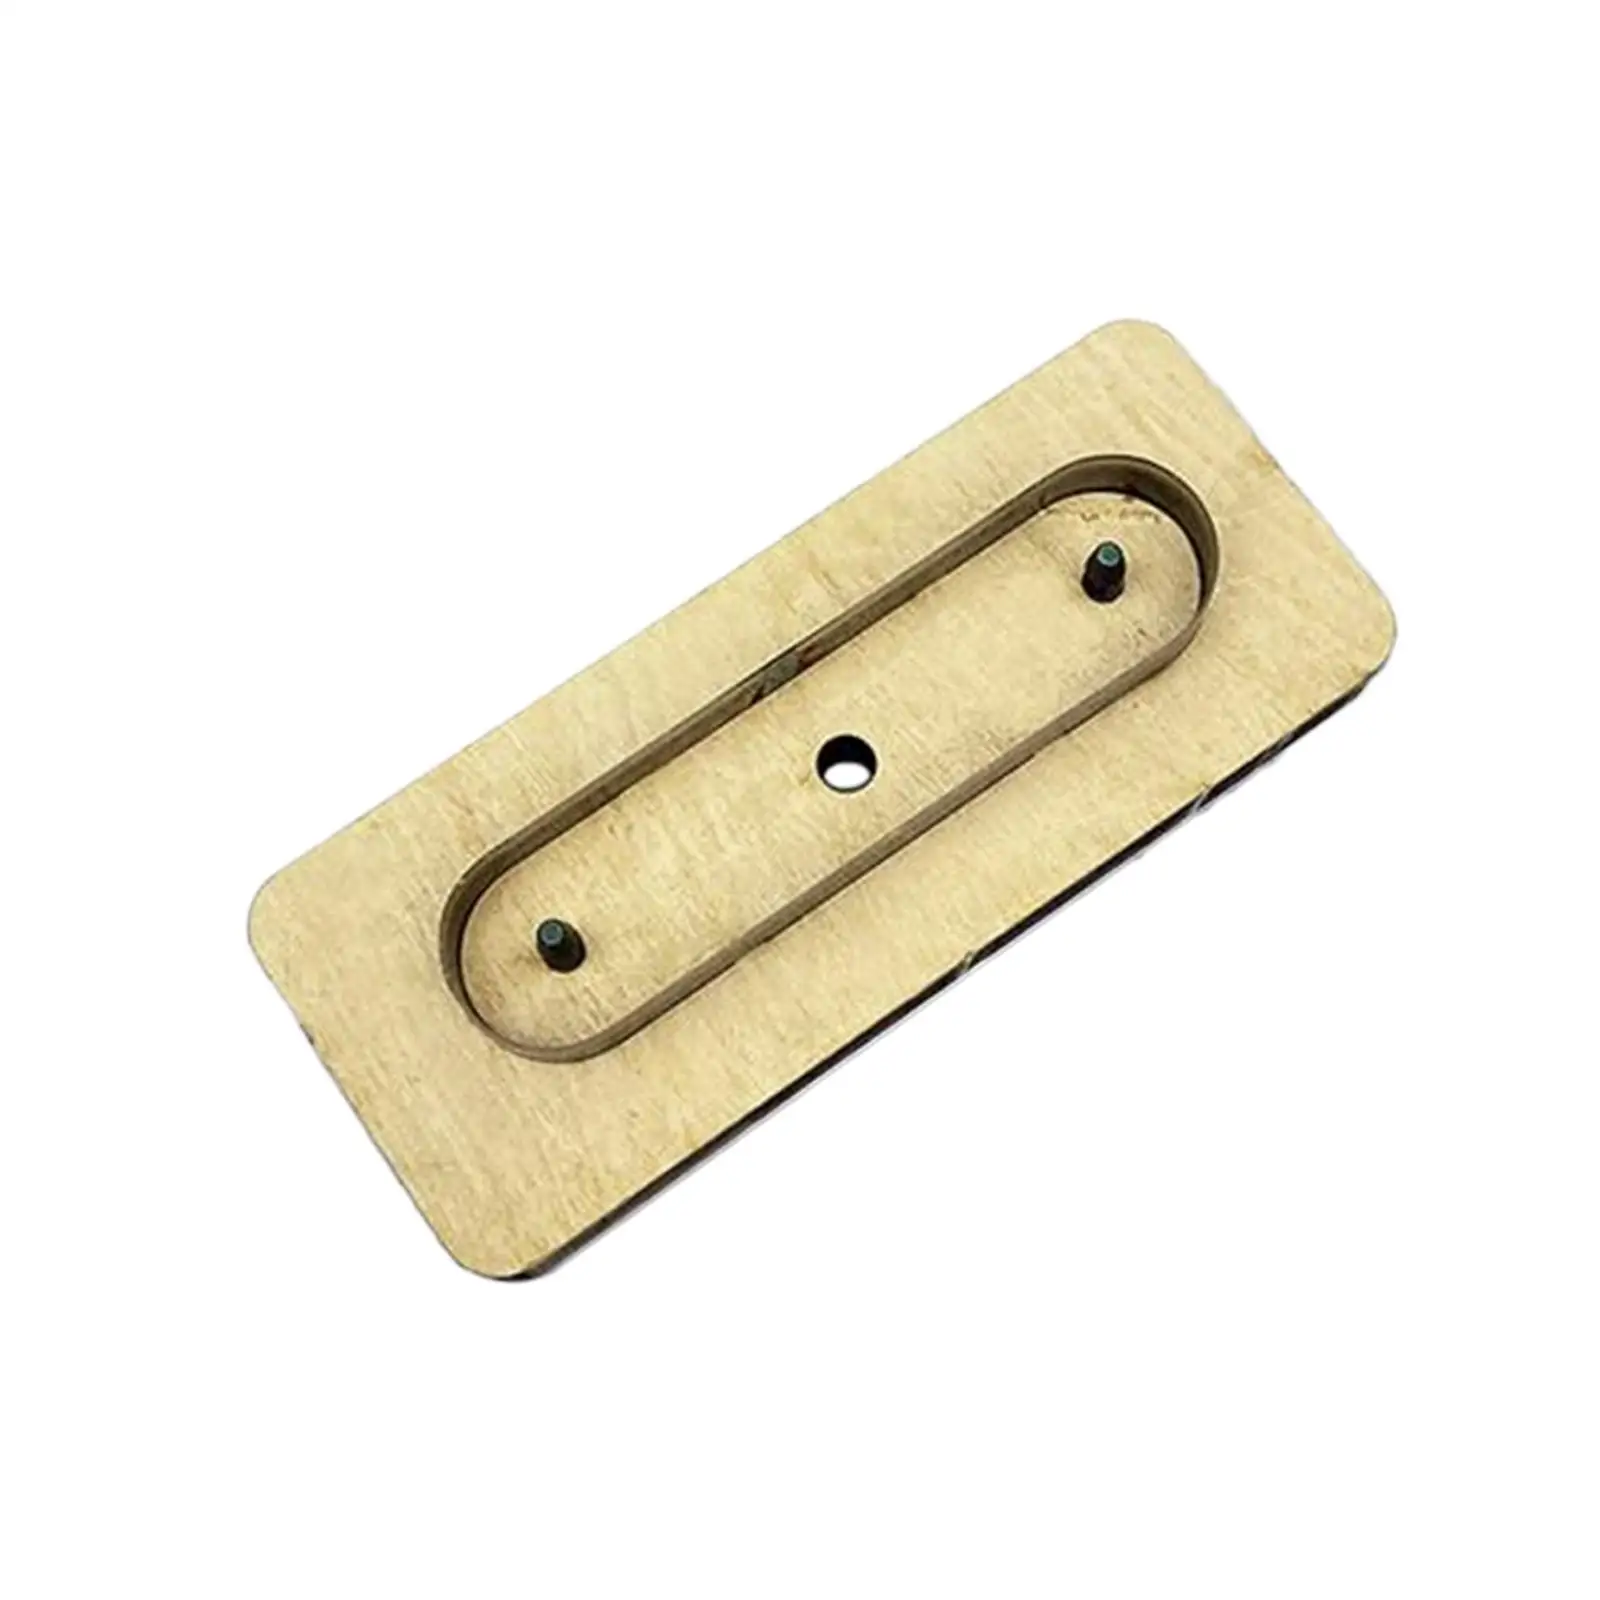 Metal Cutting Dies Data Cable Storage Buckle Template Die Cutting Mold for Die-cutting Machine PU Leather Leathercraft Keychain